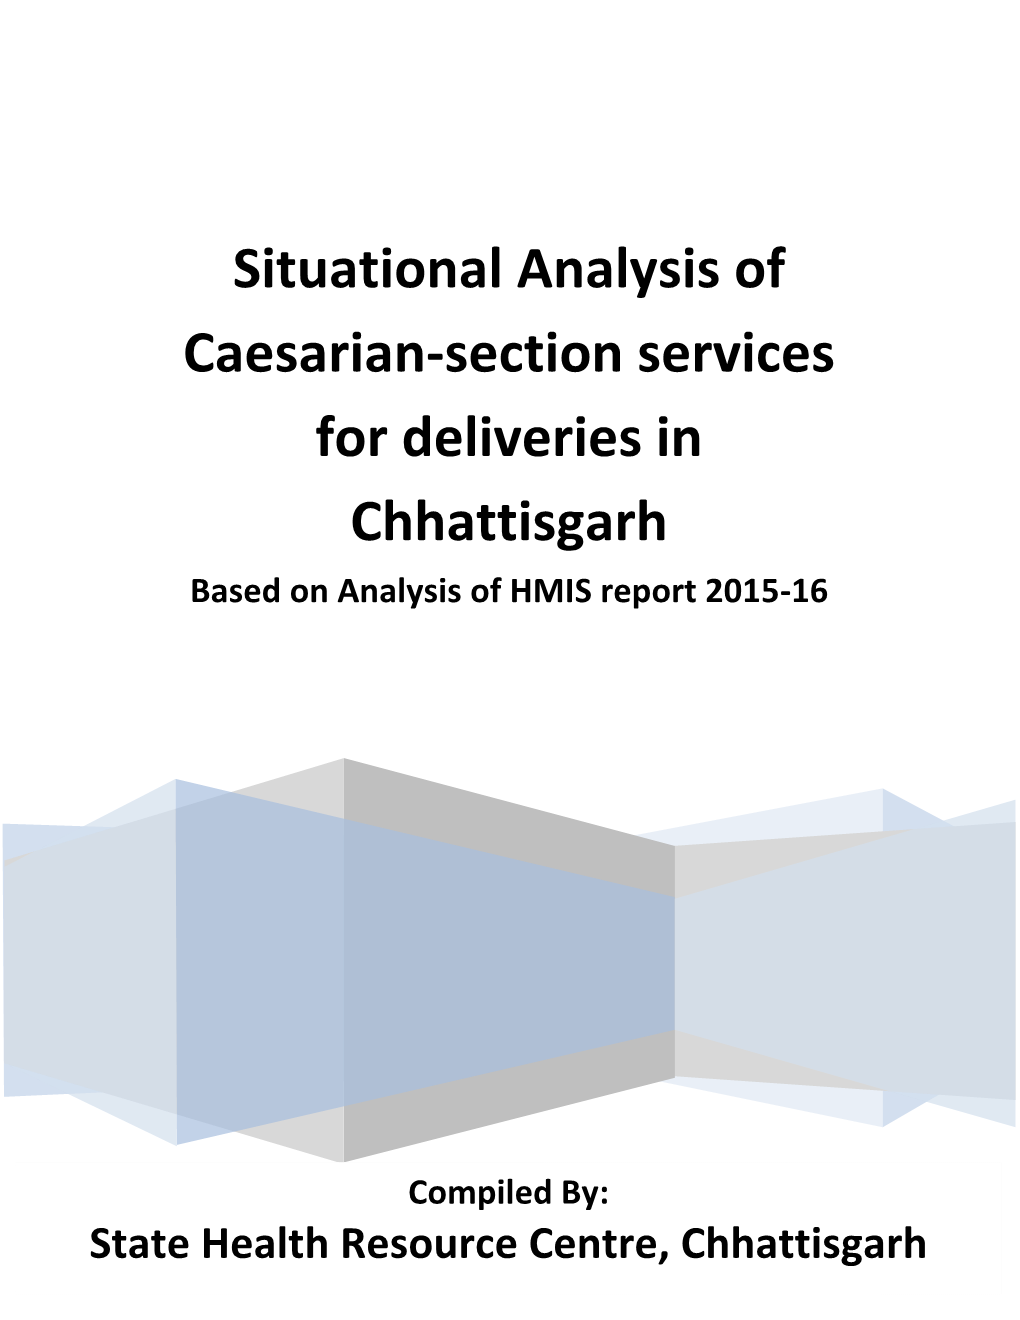 Situational Analysis of Caesarian-Section Services for Deliveries in Chhattisgarh Based on Analysis of HMIS Report 2015-16